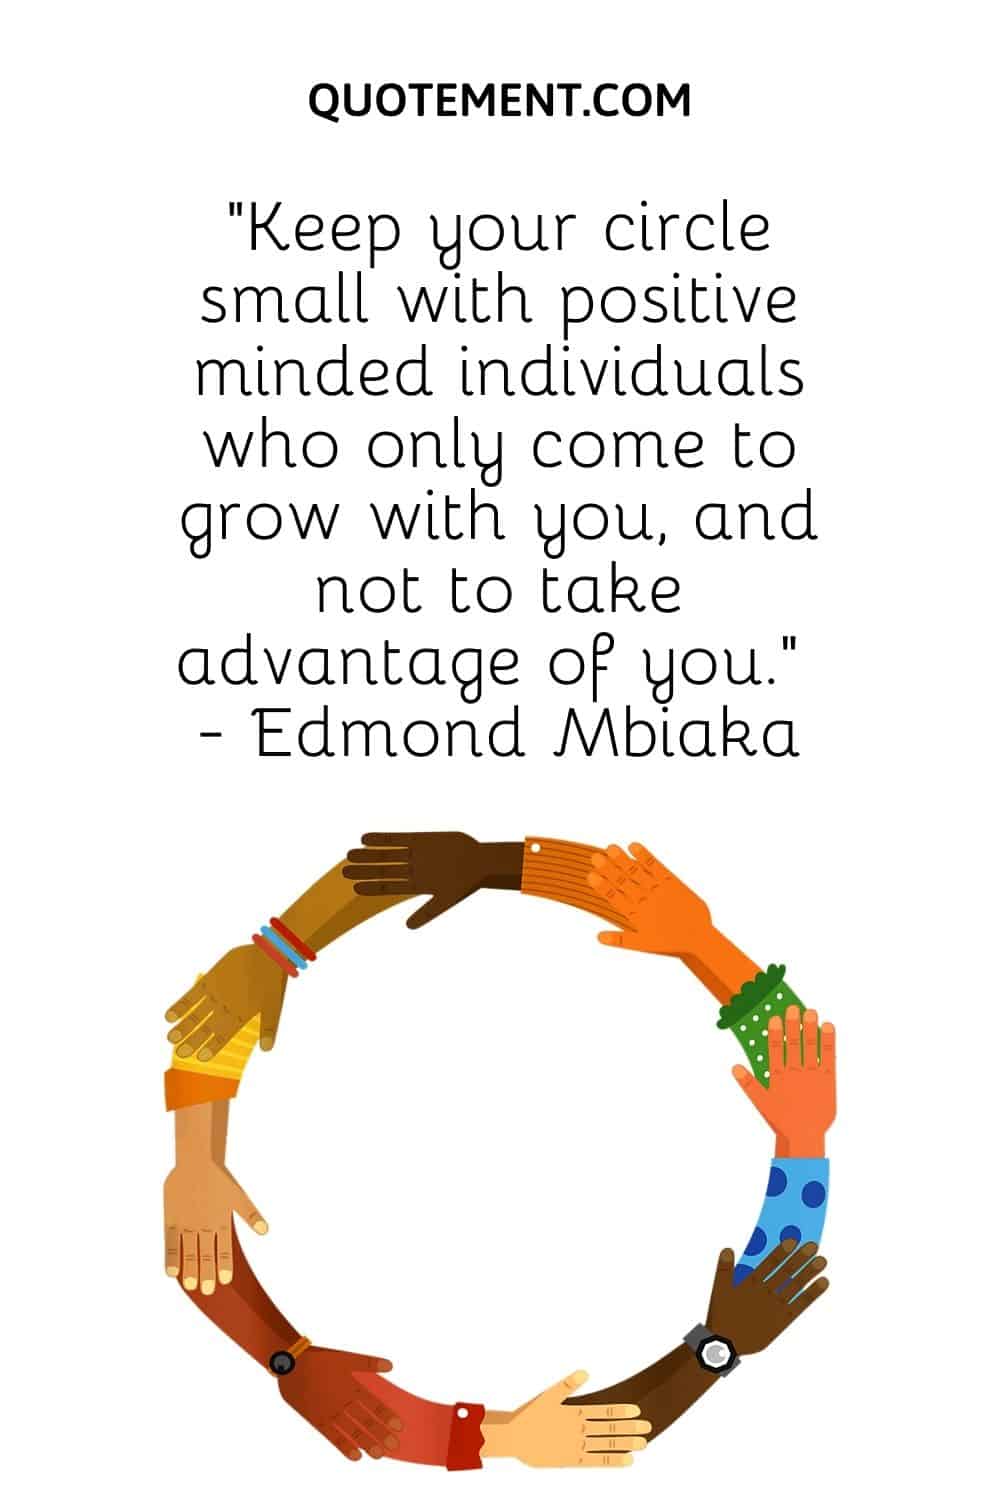 “Keep your circle small with positive minded individuals who only come to grow with you, and not to take advantage of you.” - Edmond Mbiaka